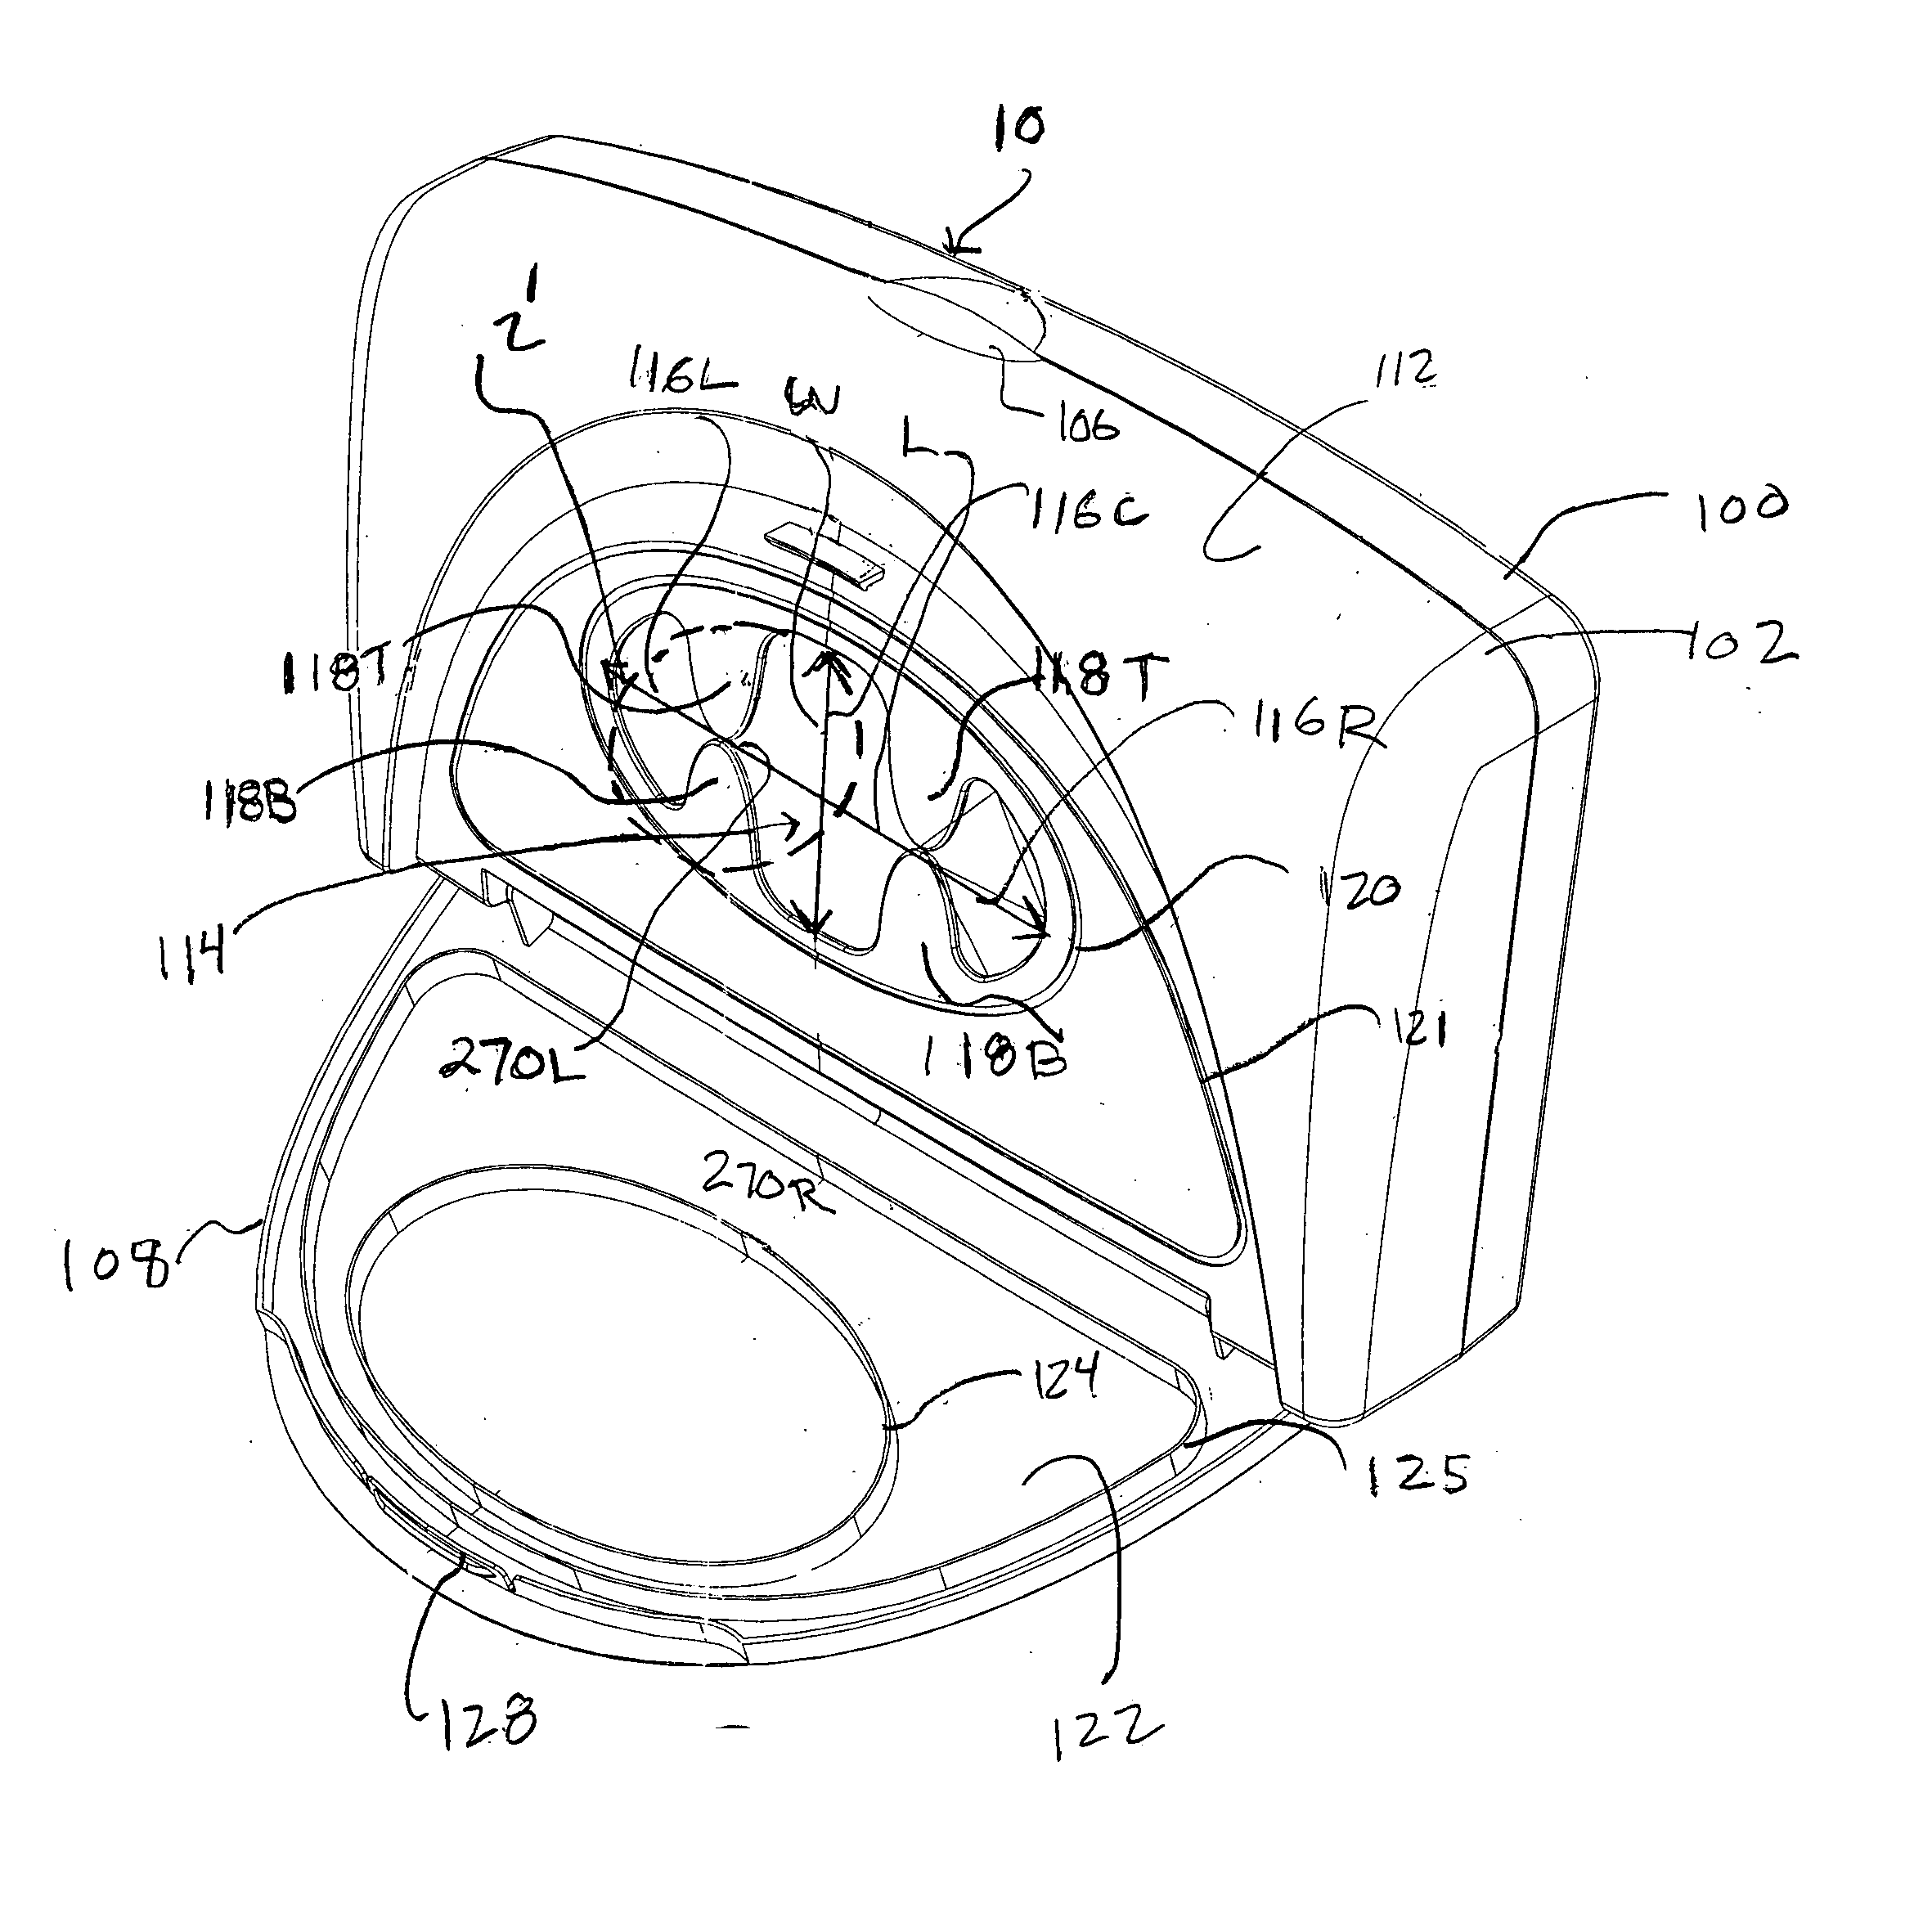 Wipes dispenser with a wide-mouthed dispensing aperture